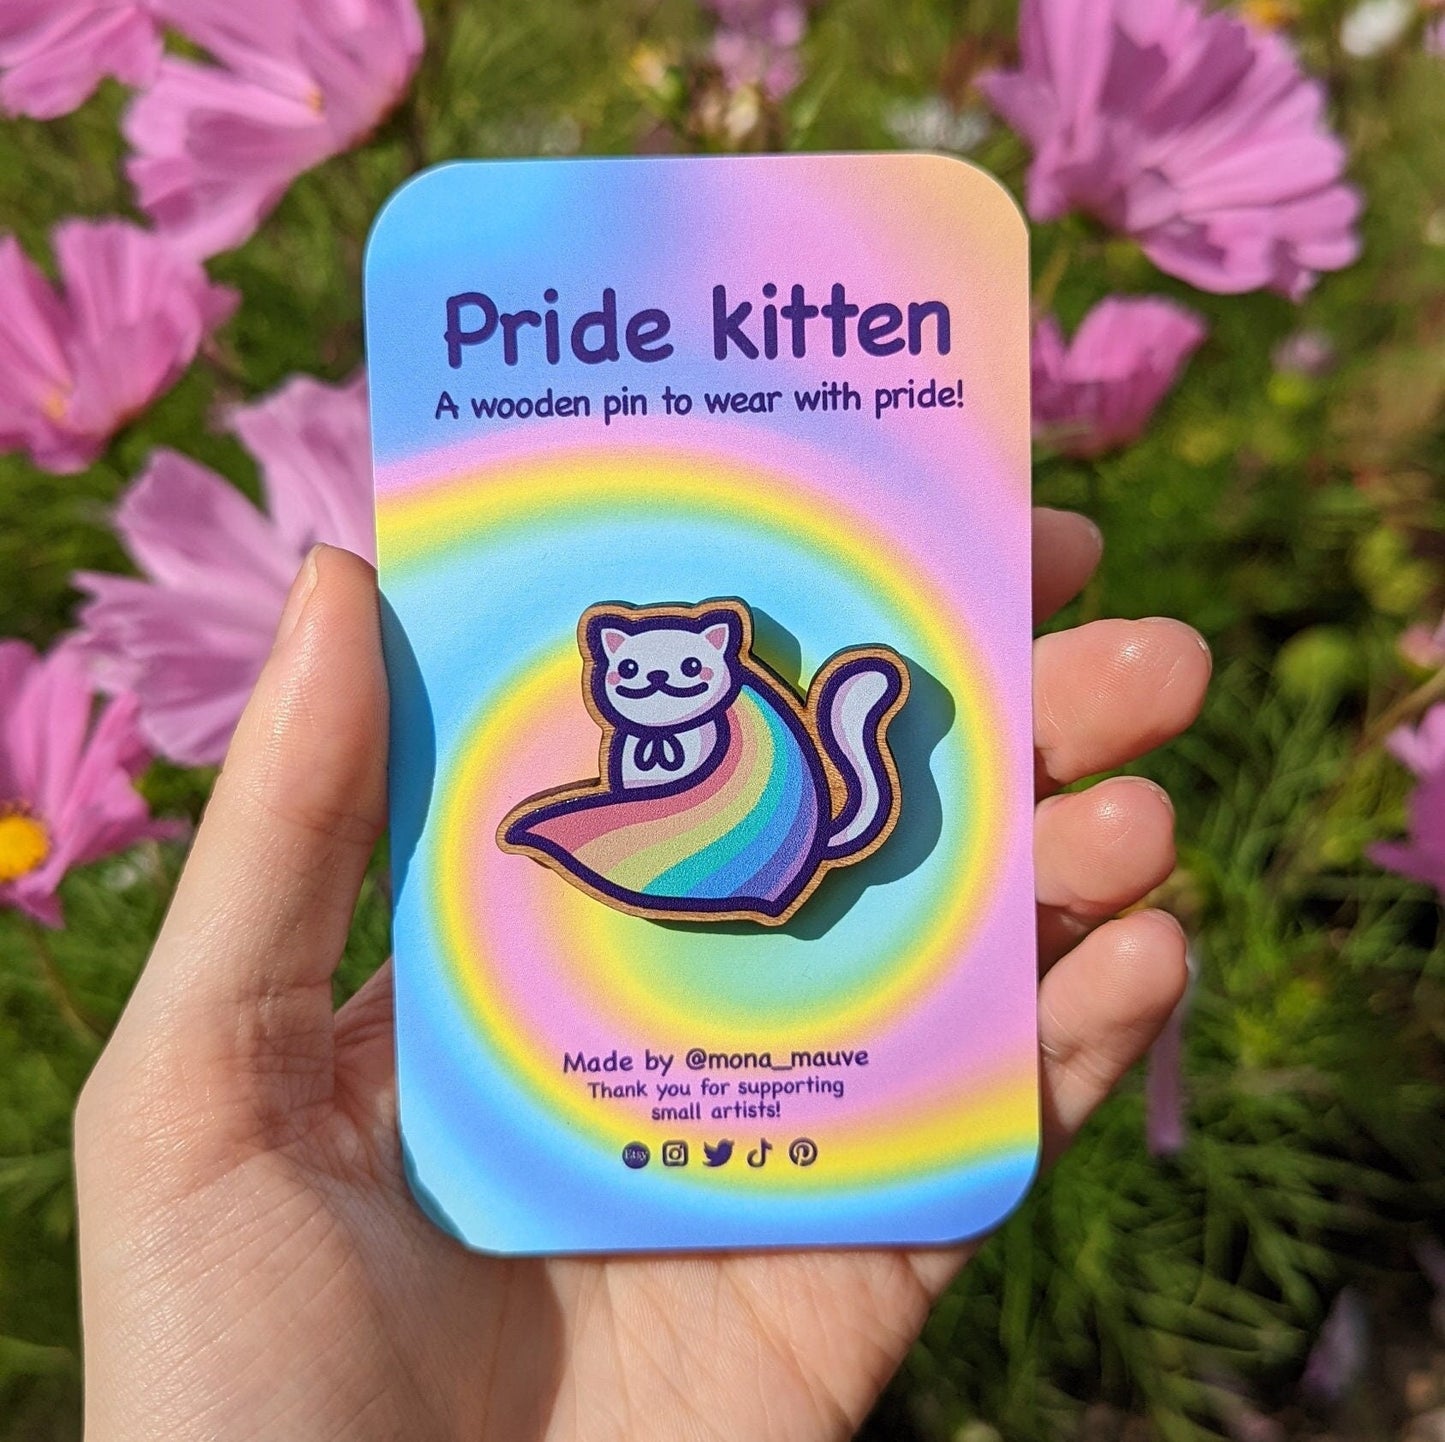 A cute wooden badge with an illustration of a cat wearing a rainbow pride cape. The backing card reads: "Pride kitten! A wooden pin to wear with pride"